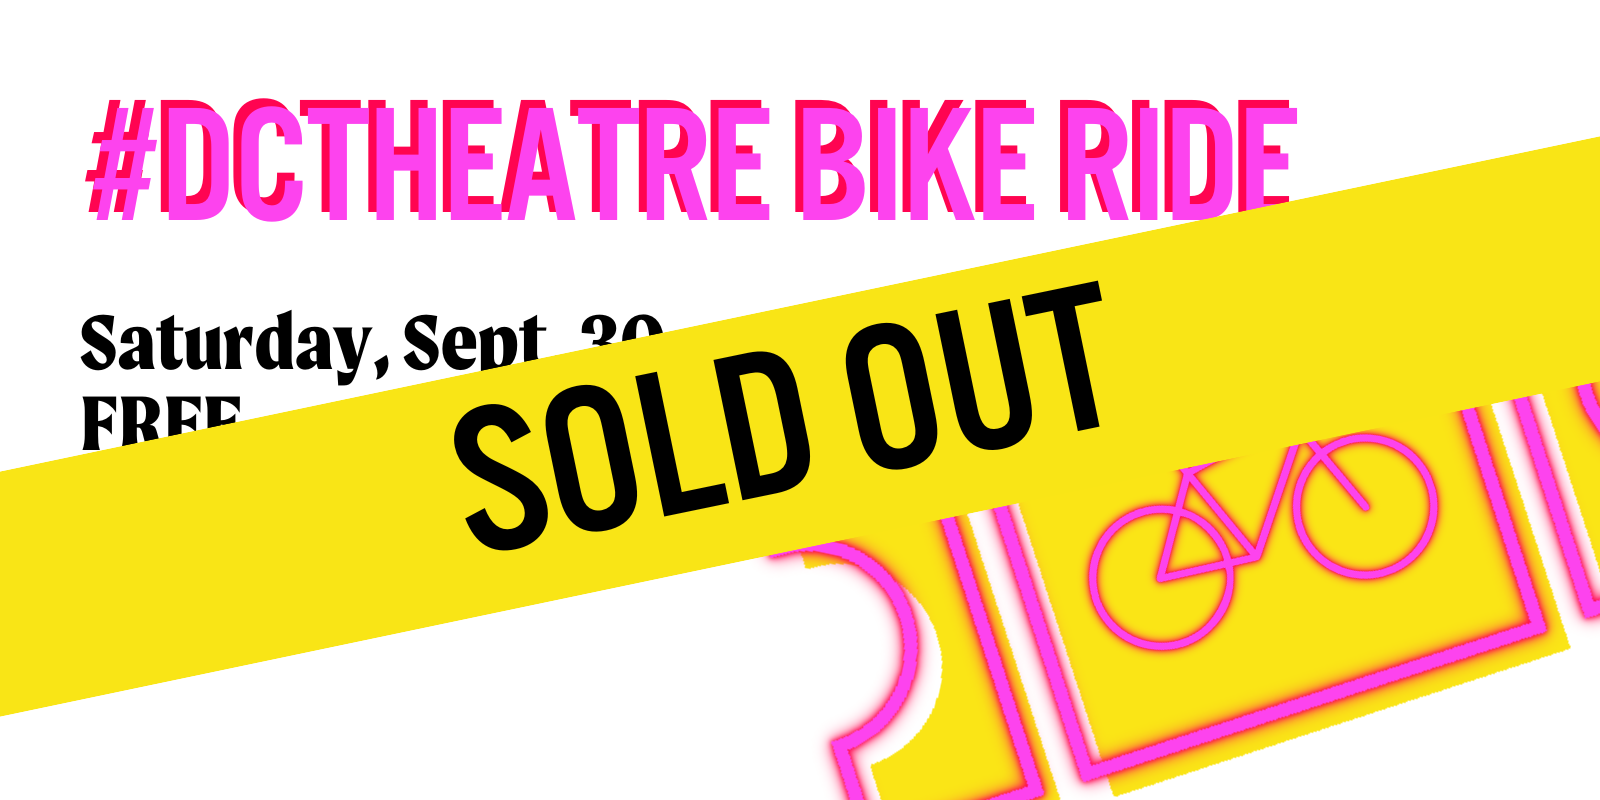 #DCTheatre Bike Ride Saturday, Sept 30 SOLD OUT